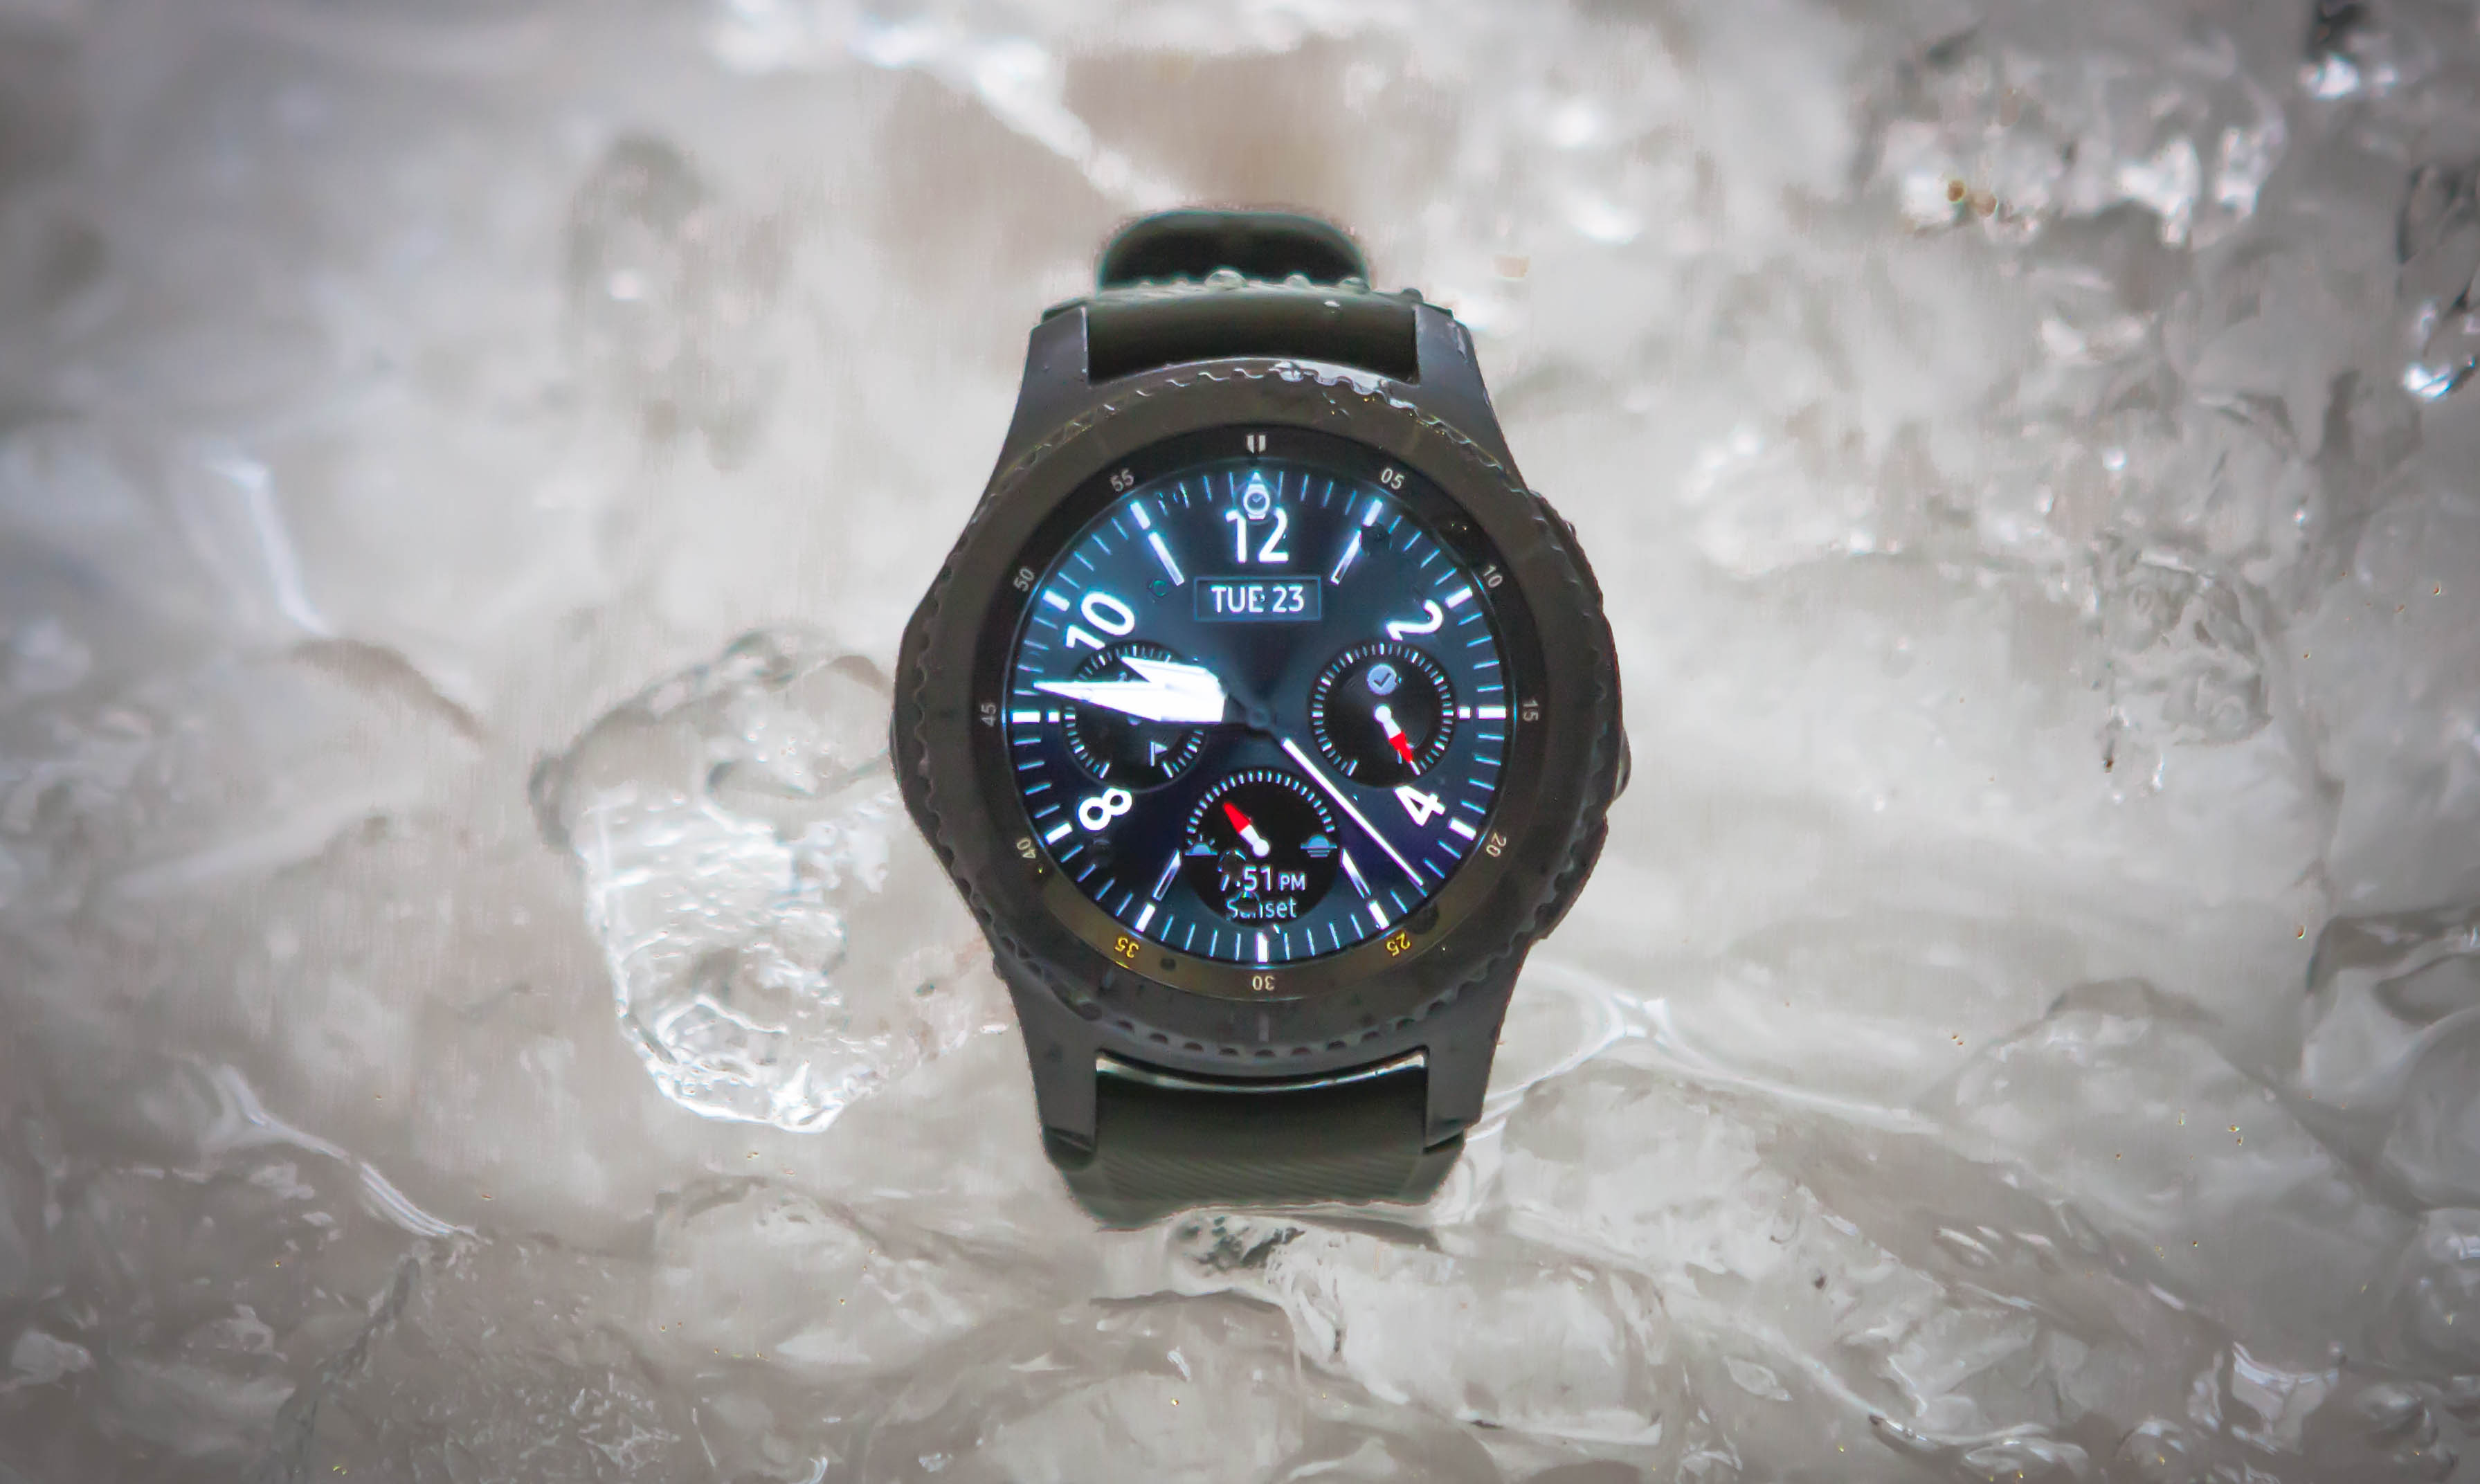 Samsung Gear S3 smartwatch immersed in dry ice